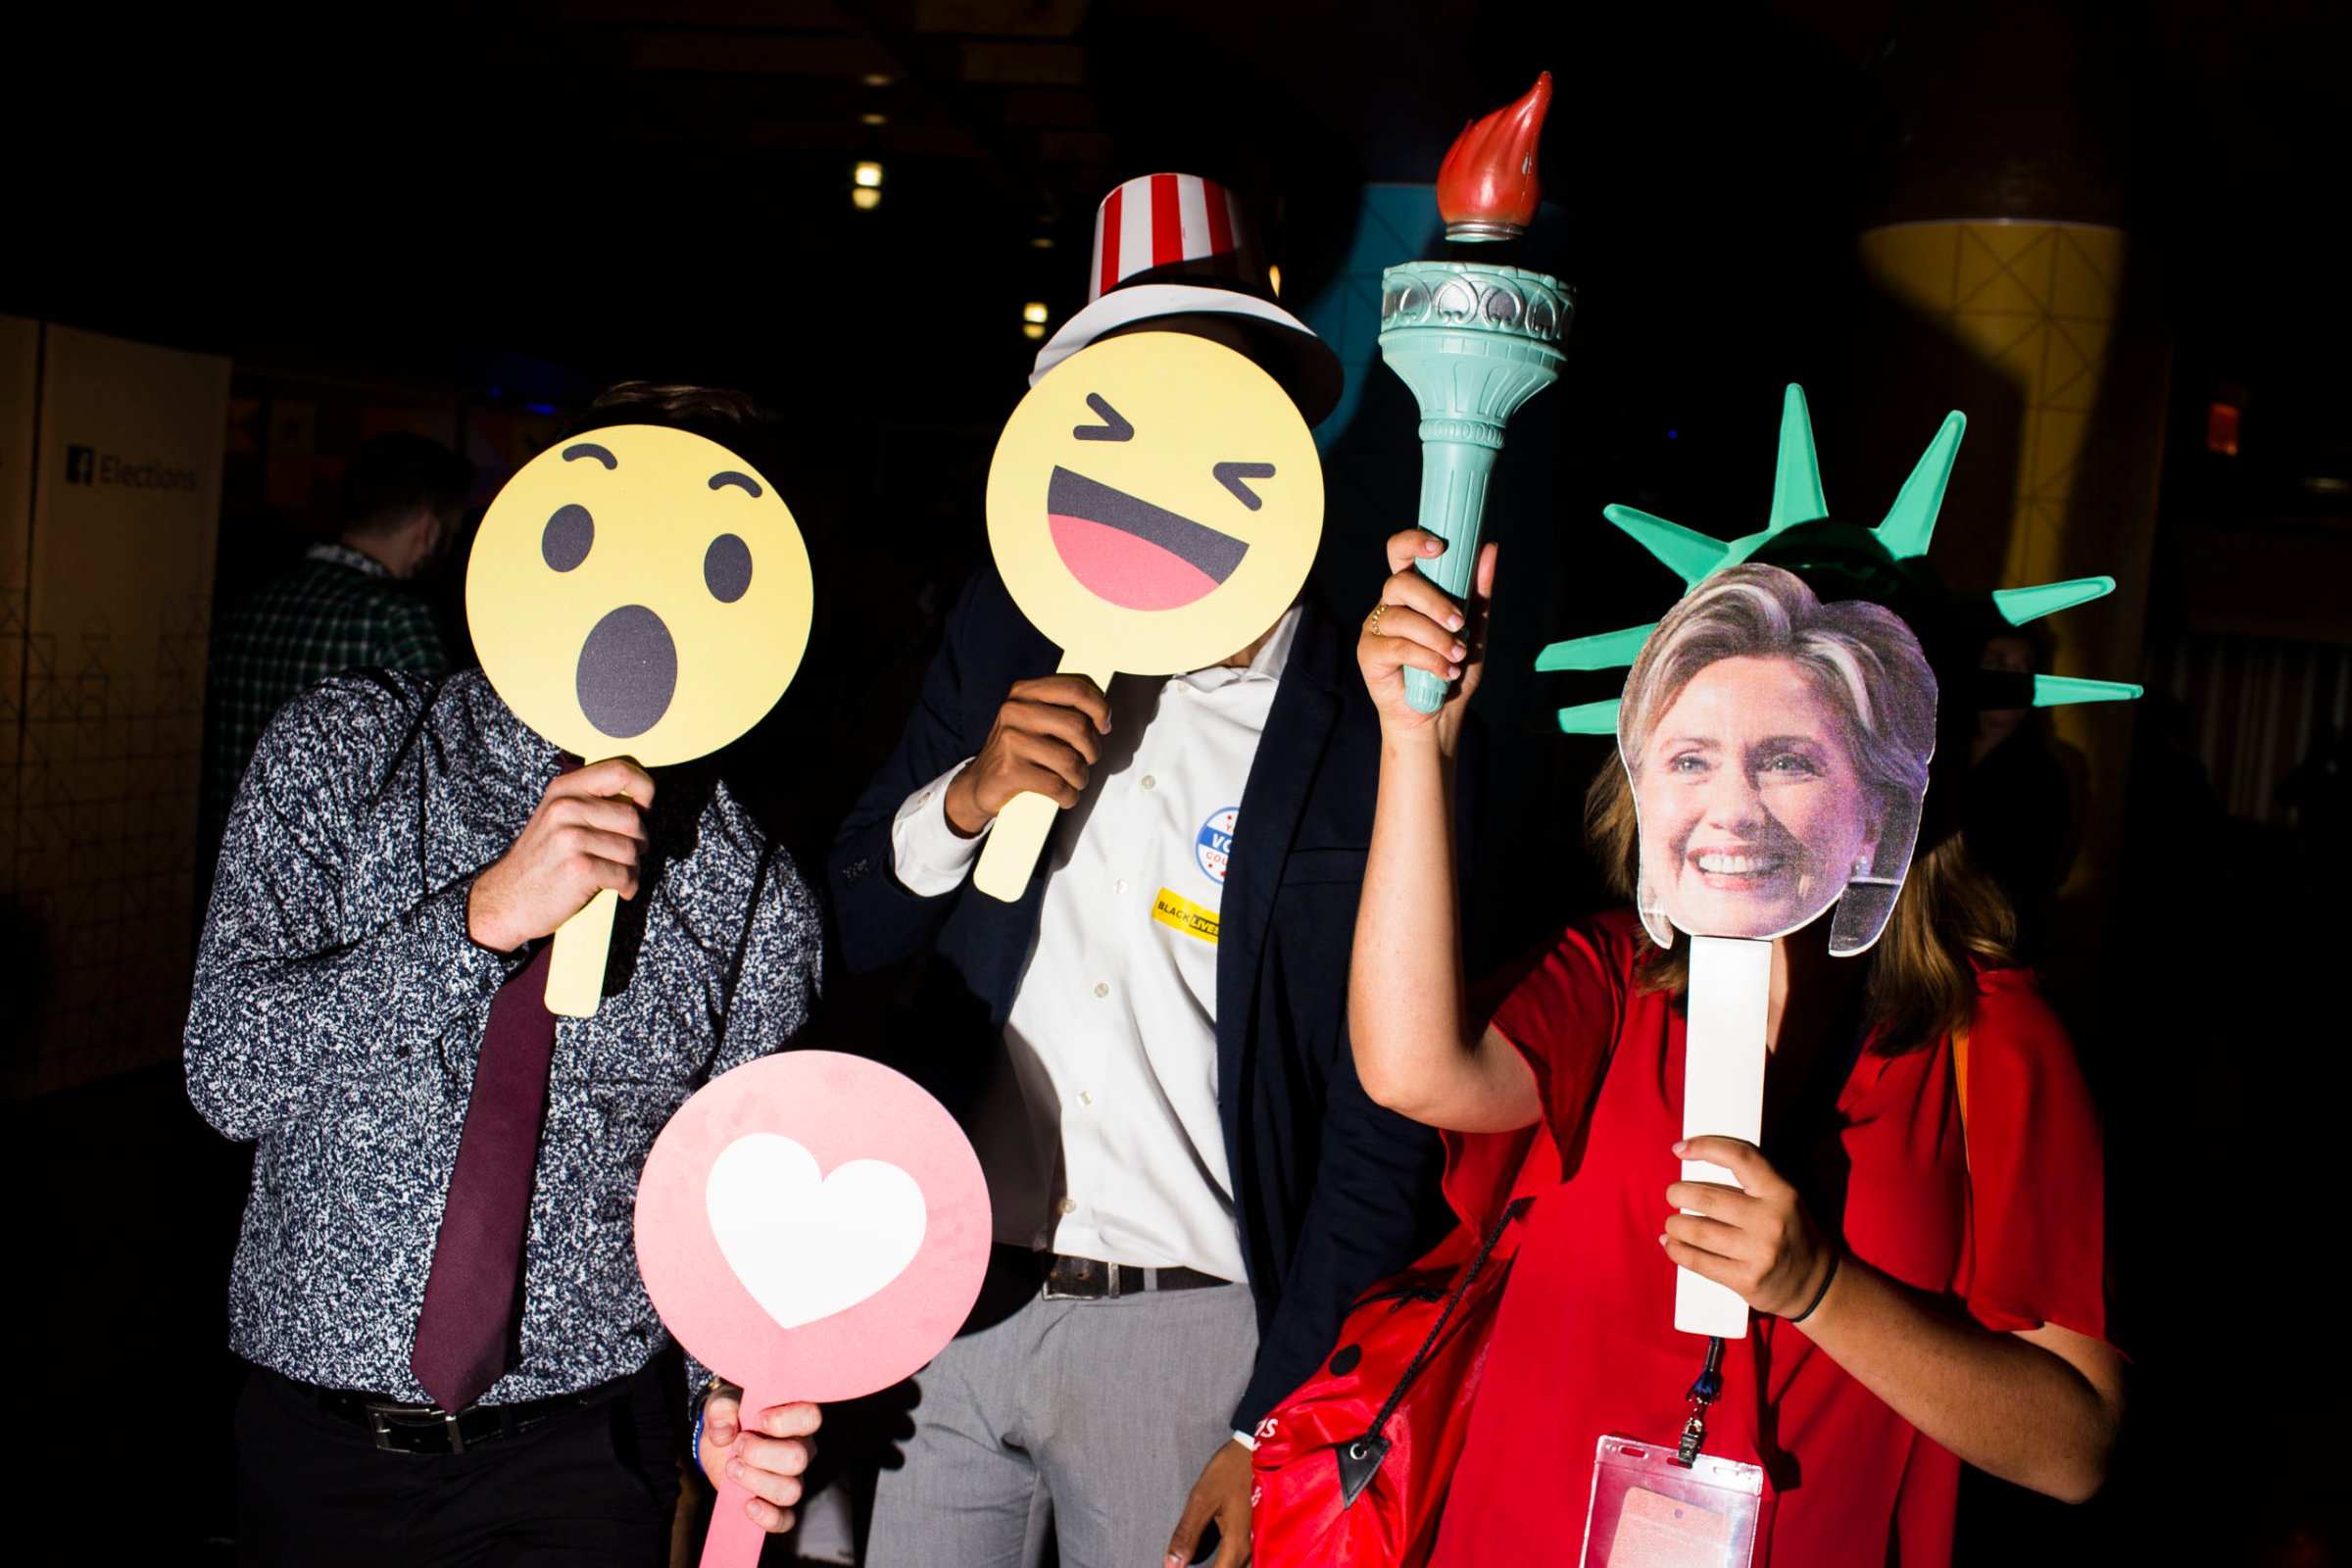 Members of College Democrats of America pose for pictures in the Instagram/ Facebook lounge at the 2016 Democratic National Convention in Philadelphia on Monday, July 25, 2016.